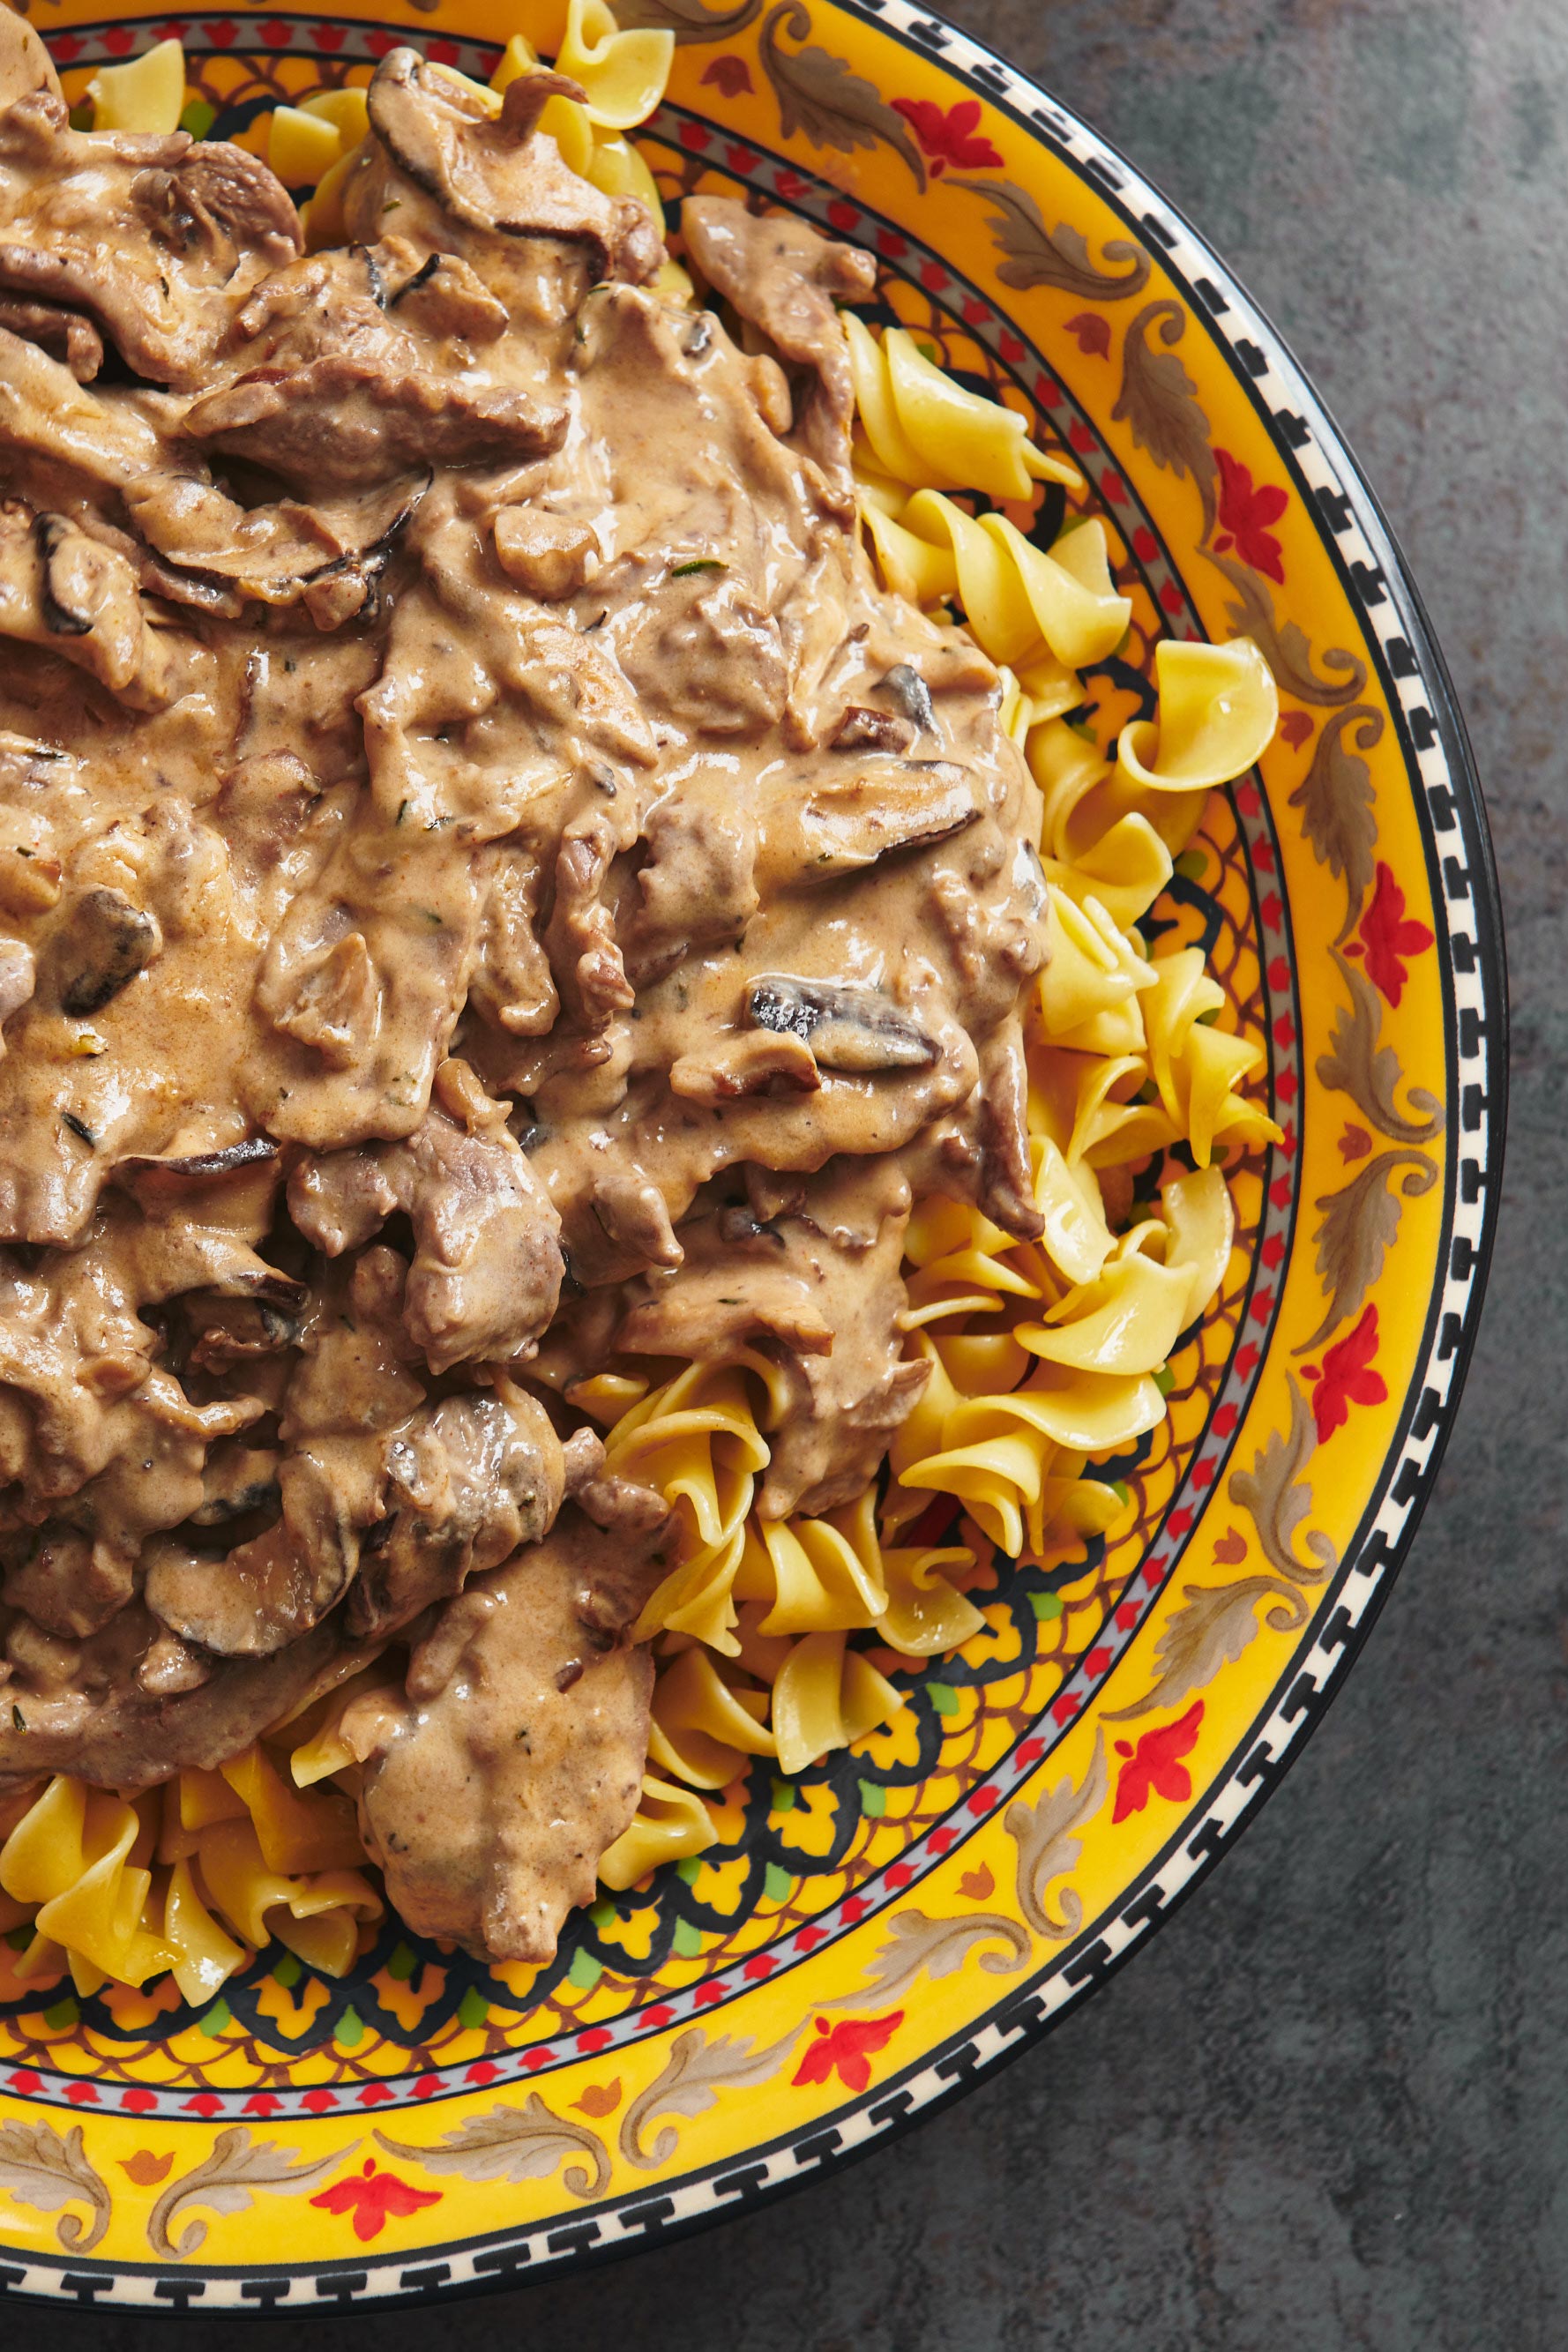 Beef Stroganoff in a colorful bowl.